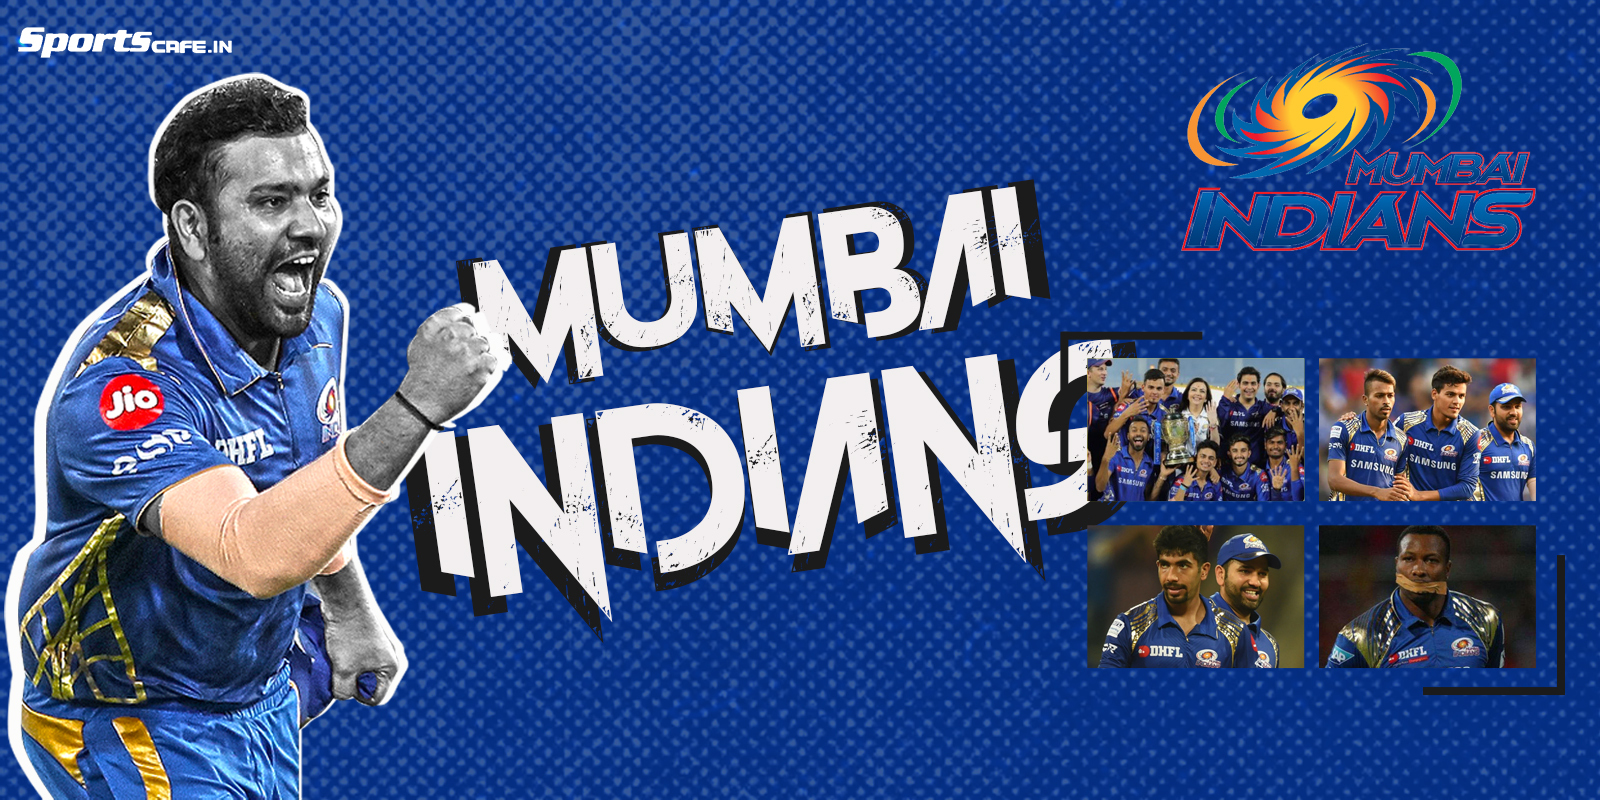 The Extensive IPL 2021 Preview | Mumbai Indians edition ft. Hand them the trophy already